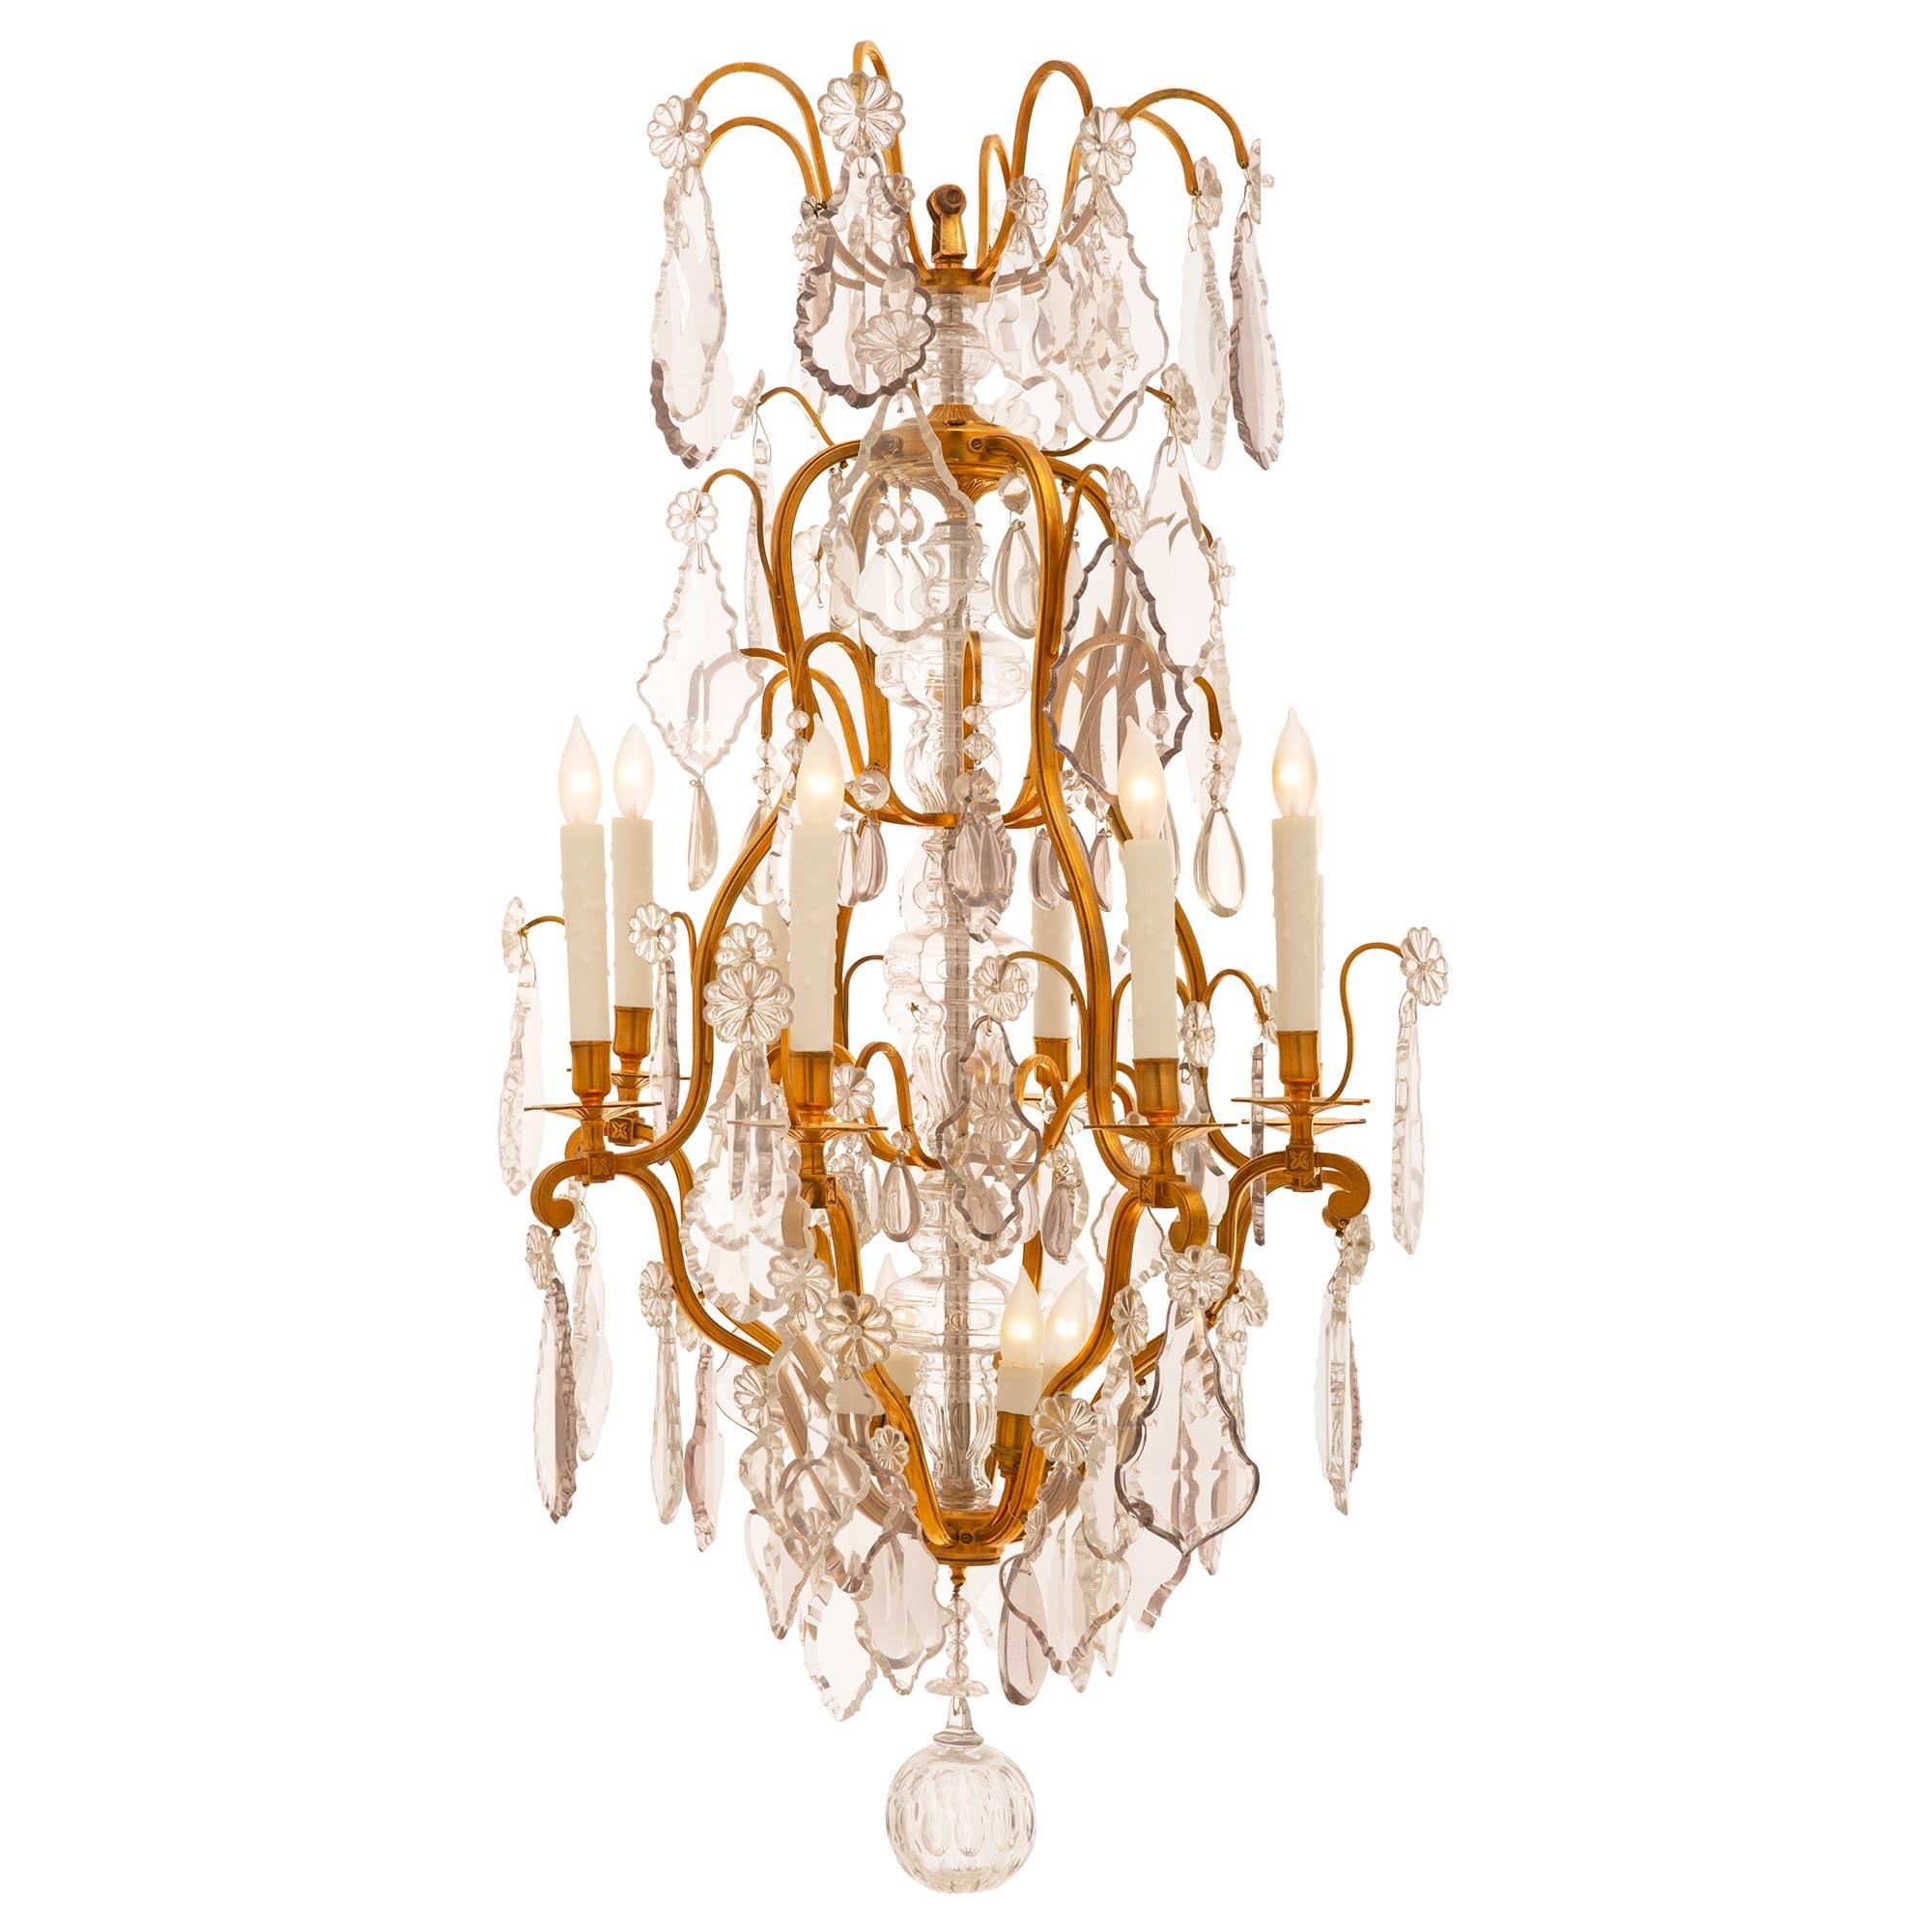 An exceptional French 19th century Louis XV st. Baccarat crystal and ormolu chandelier. The eight arm twelve light chandelier is centered by a beautiful cut crystal ball below the elegantly scrolled cage adorned with a stunning array of clear,